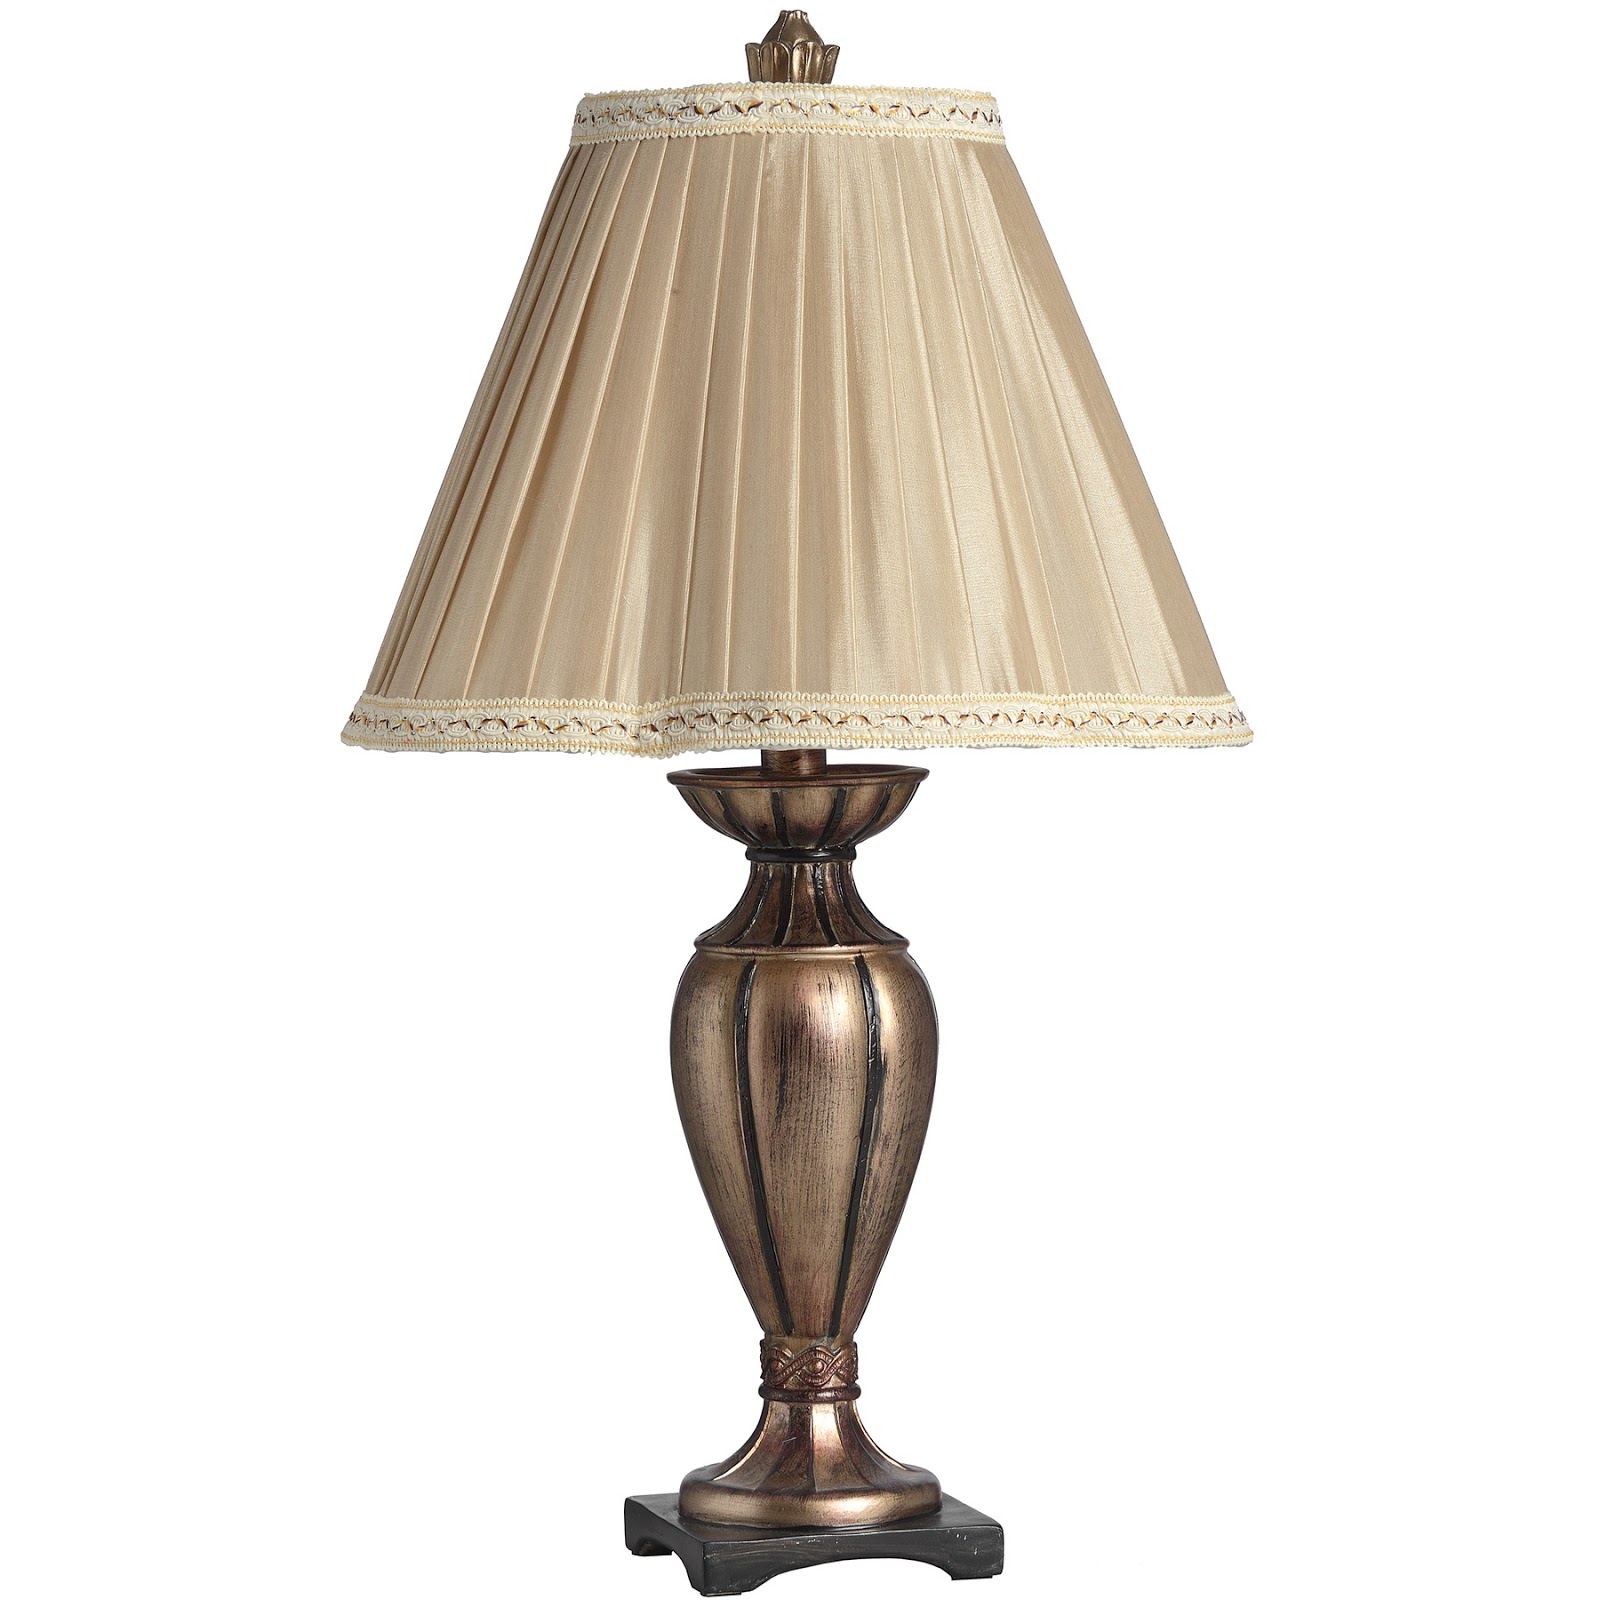 Discounted Bedside Lamps For Sale in UK